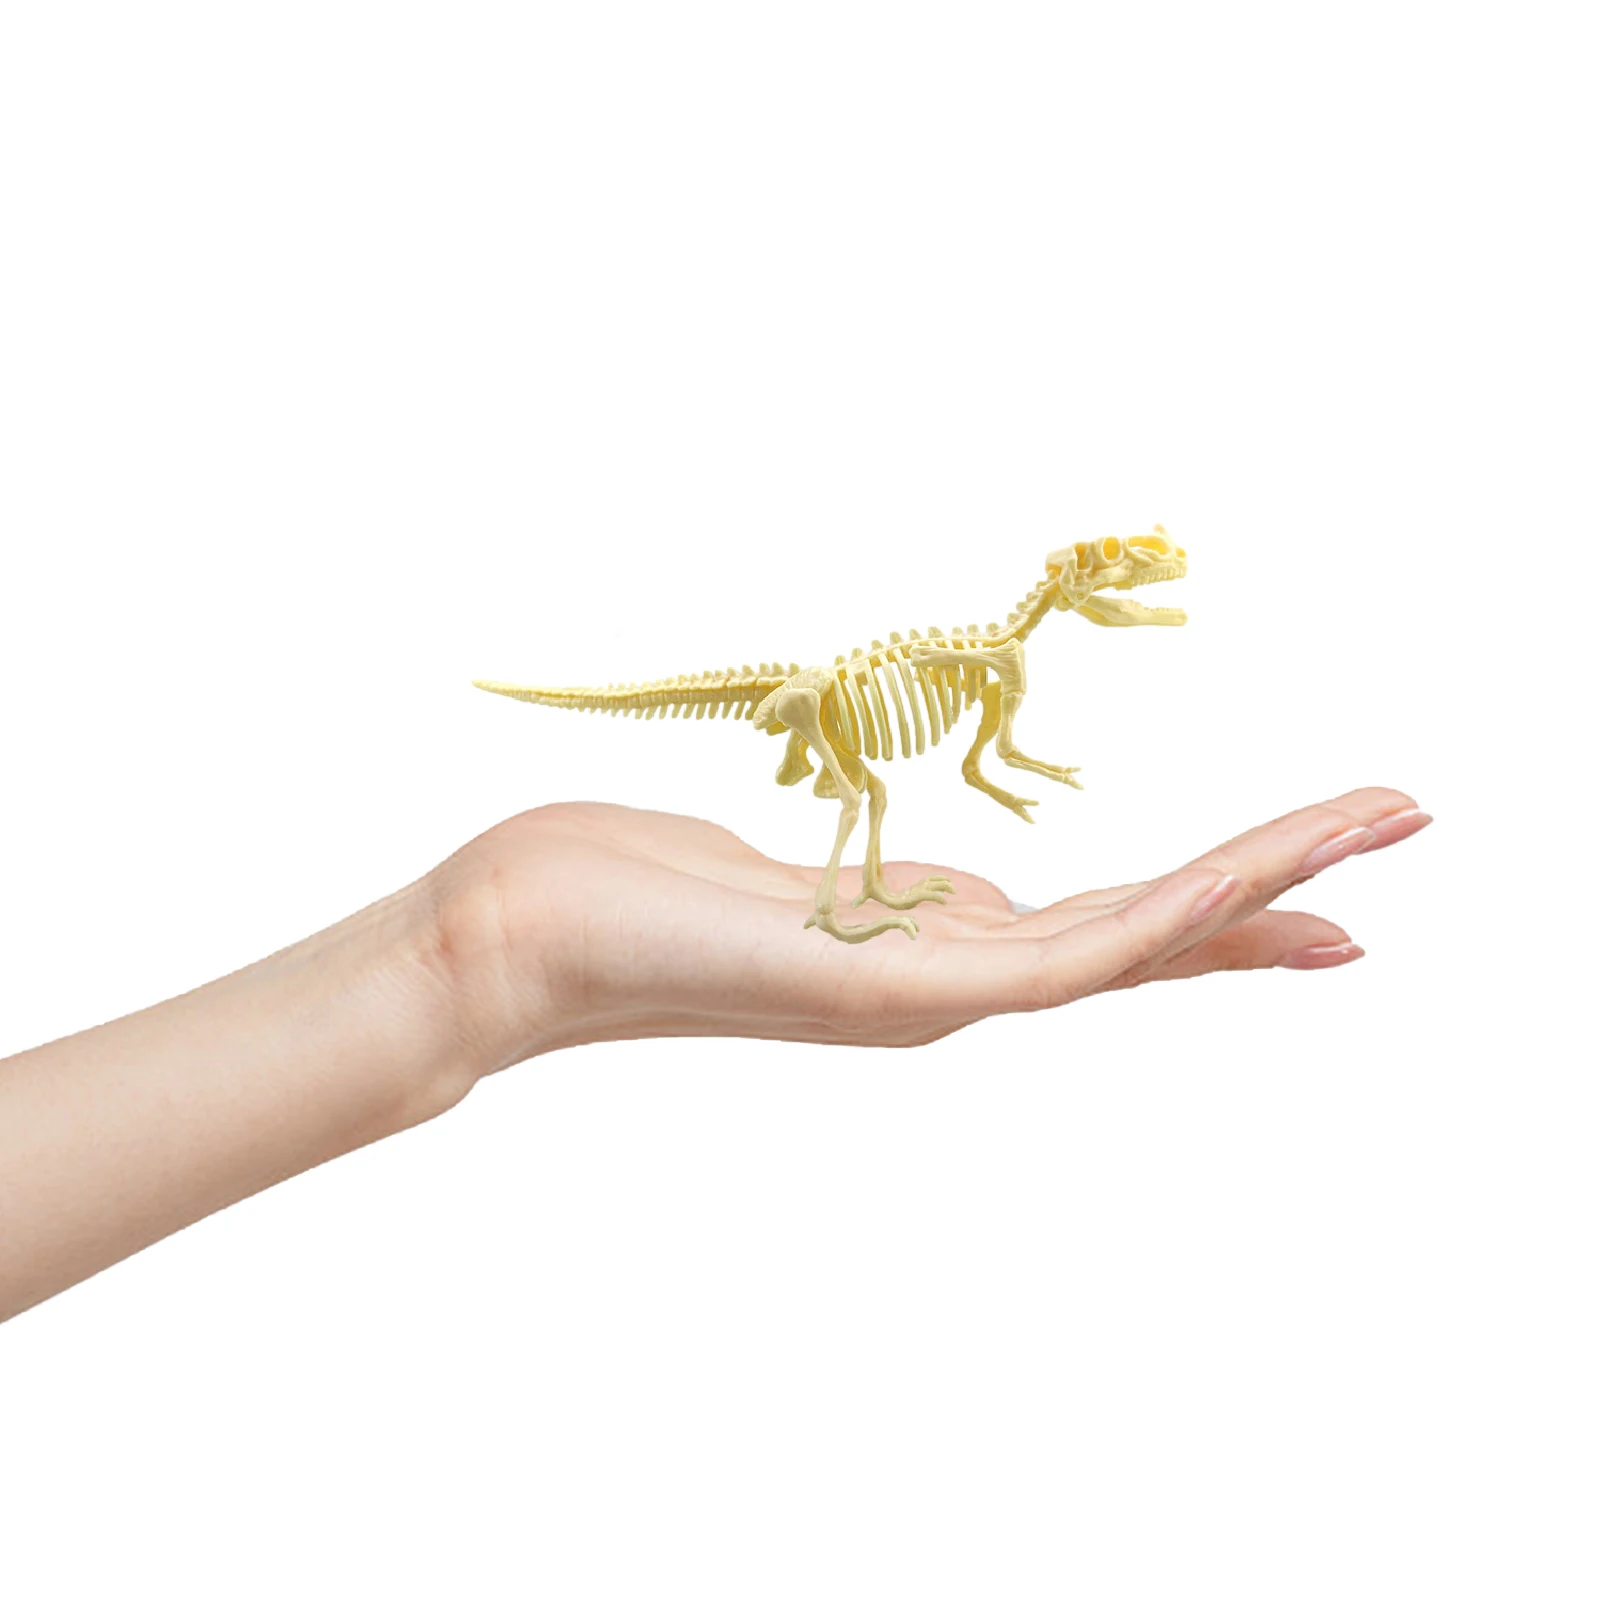 

7 Pieces Dinosaur 3D Puzzle Simulation Skeleton Animals Hands Craft Puzzle STEM Toys For Kids Adults DIY Dinosaur Fossils